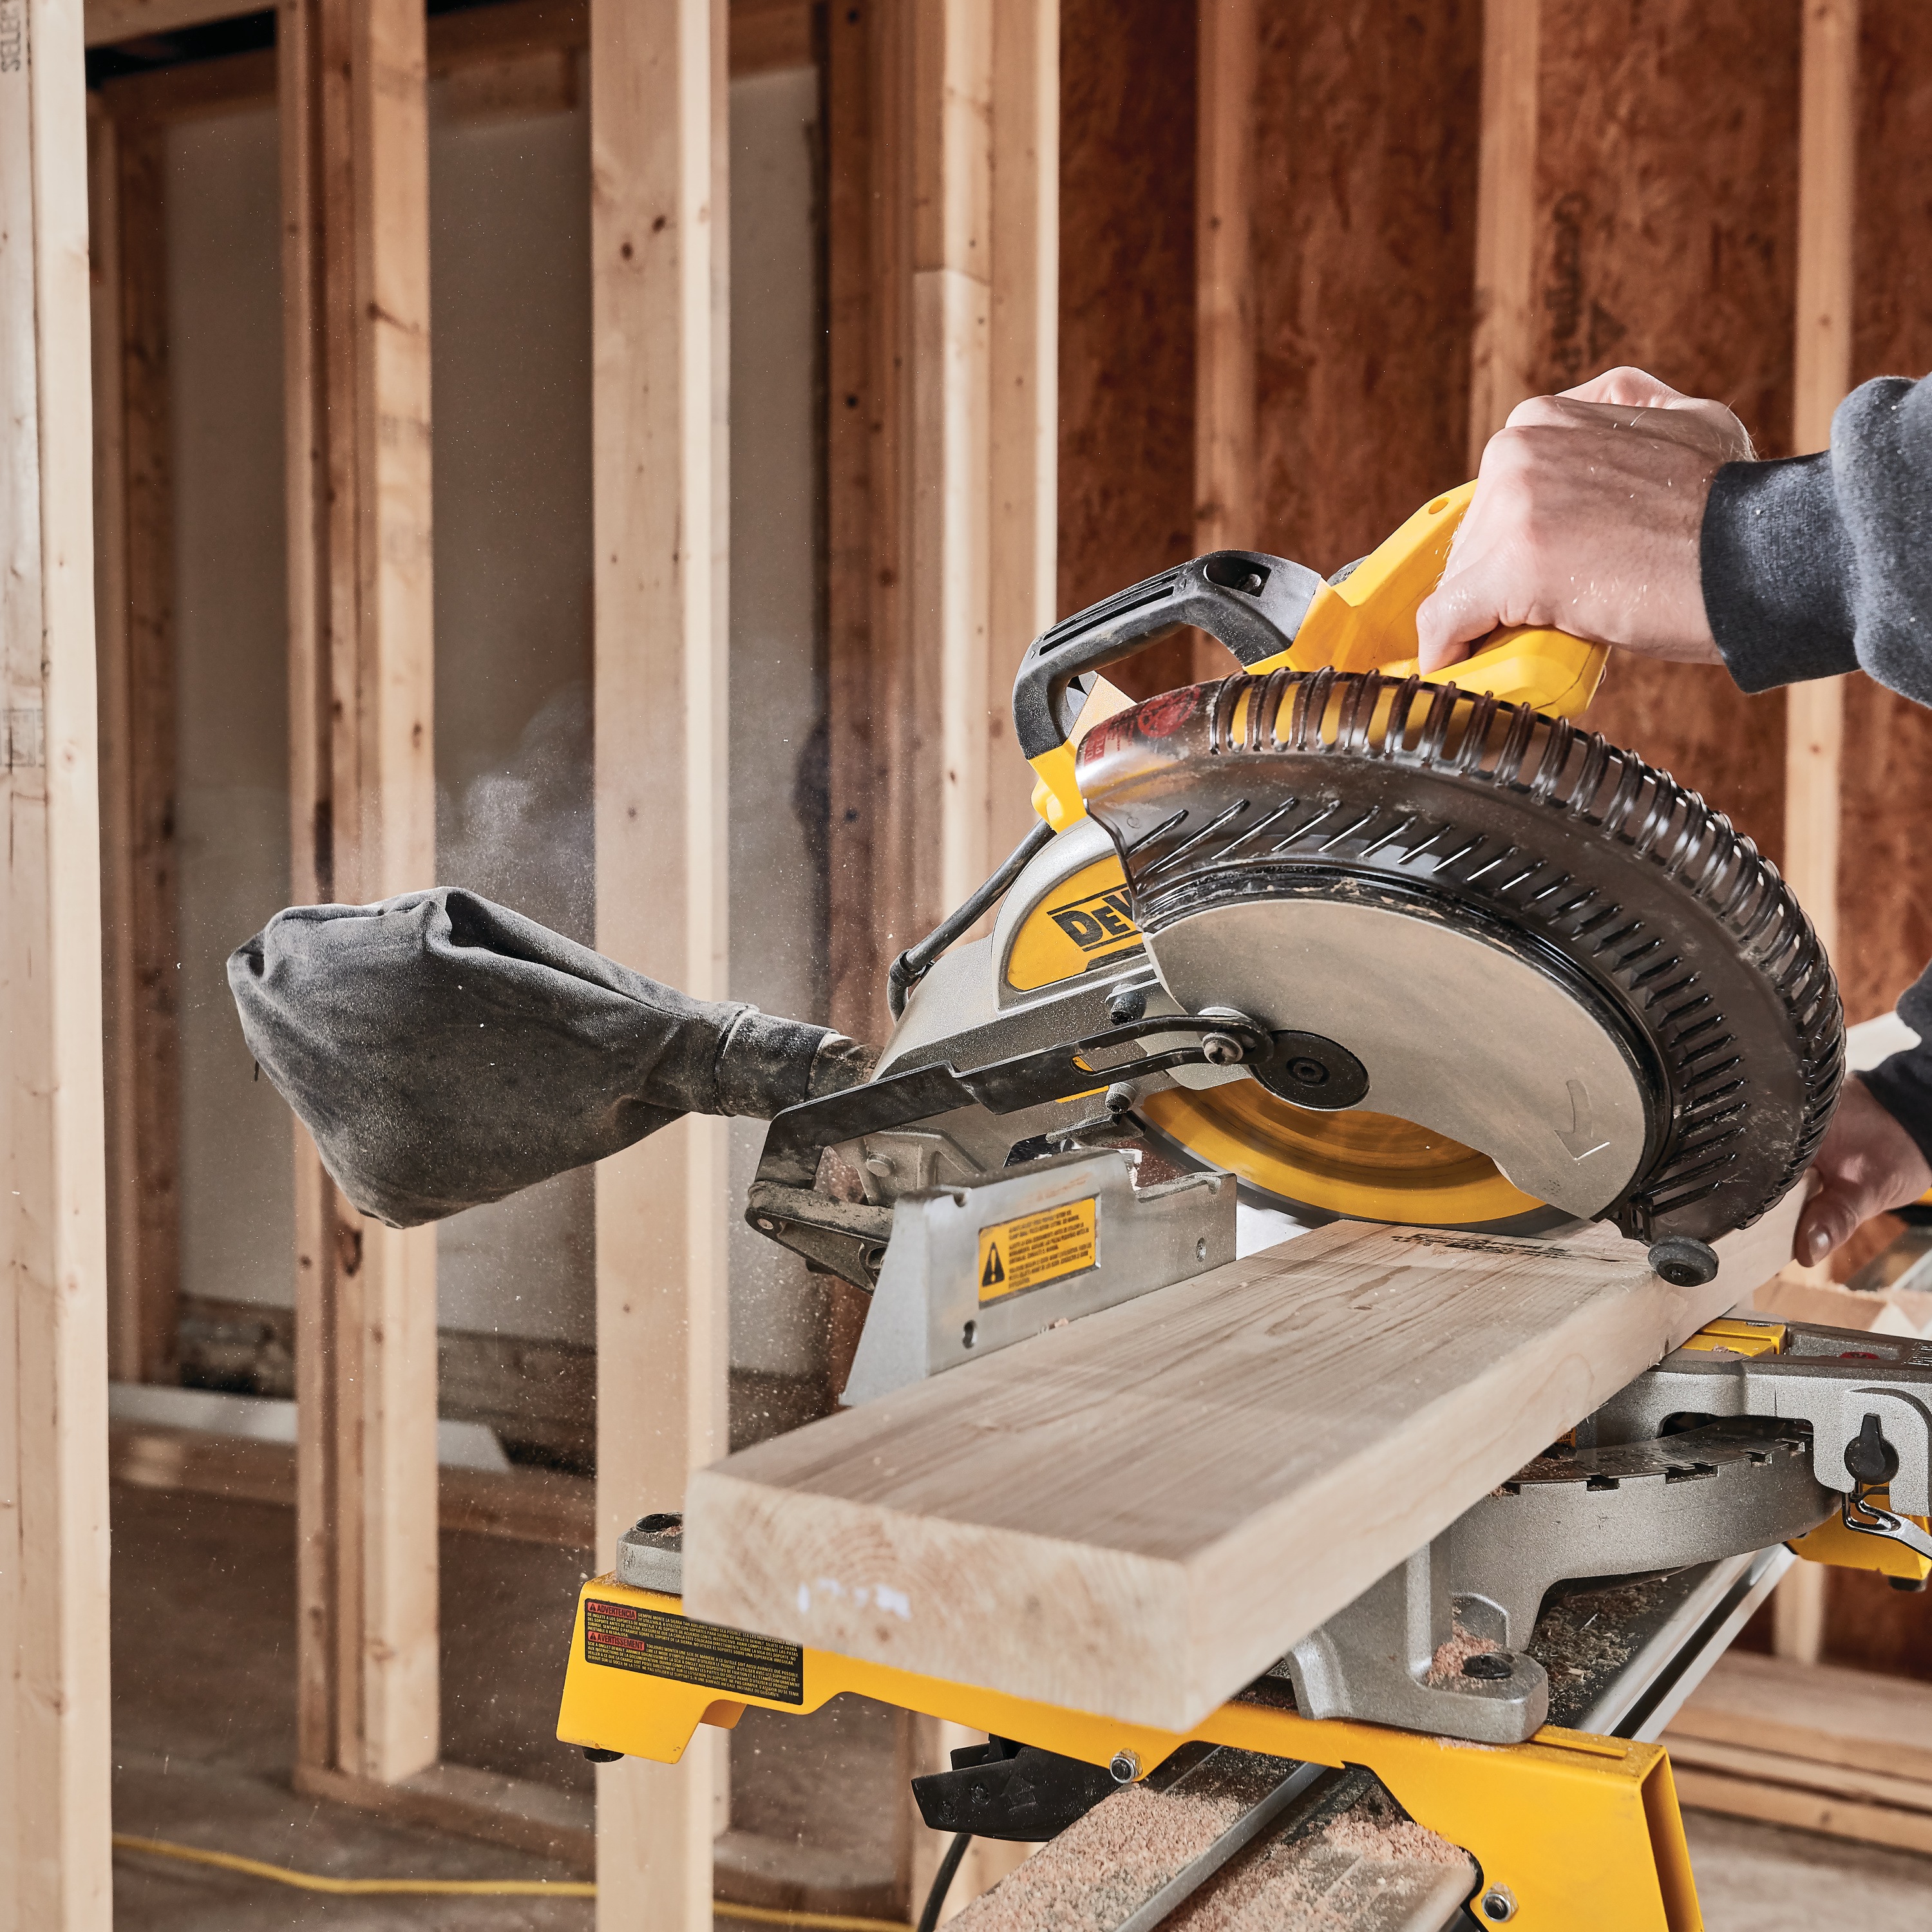 Electric single bevel compound miter saw being used to cut wood.